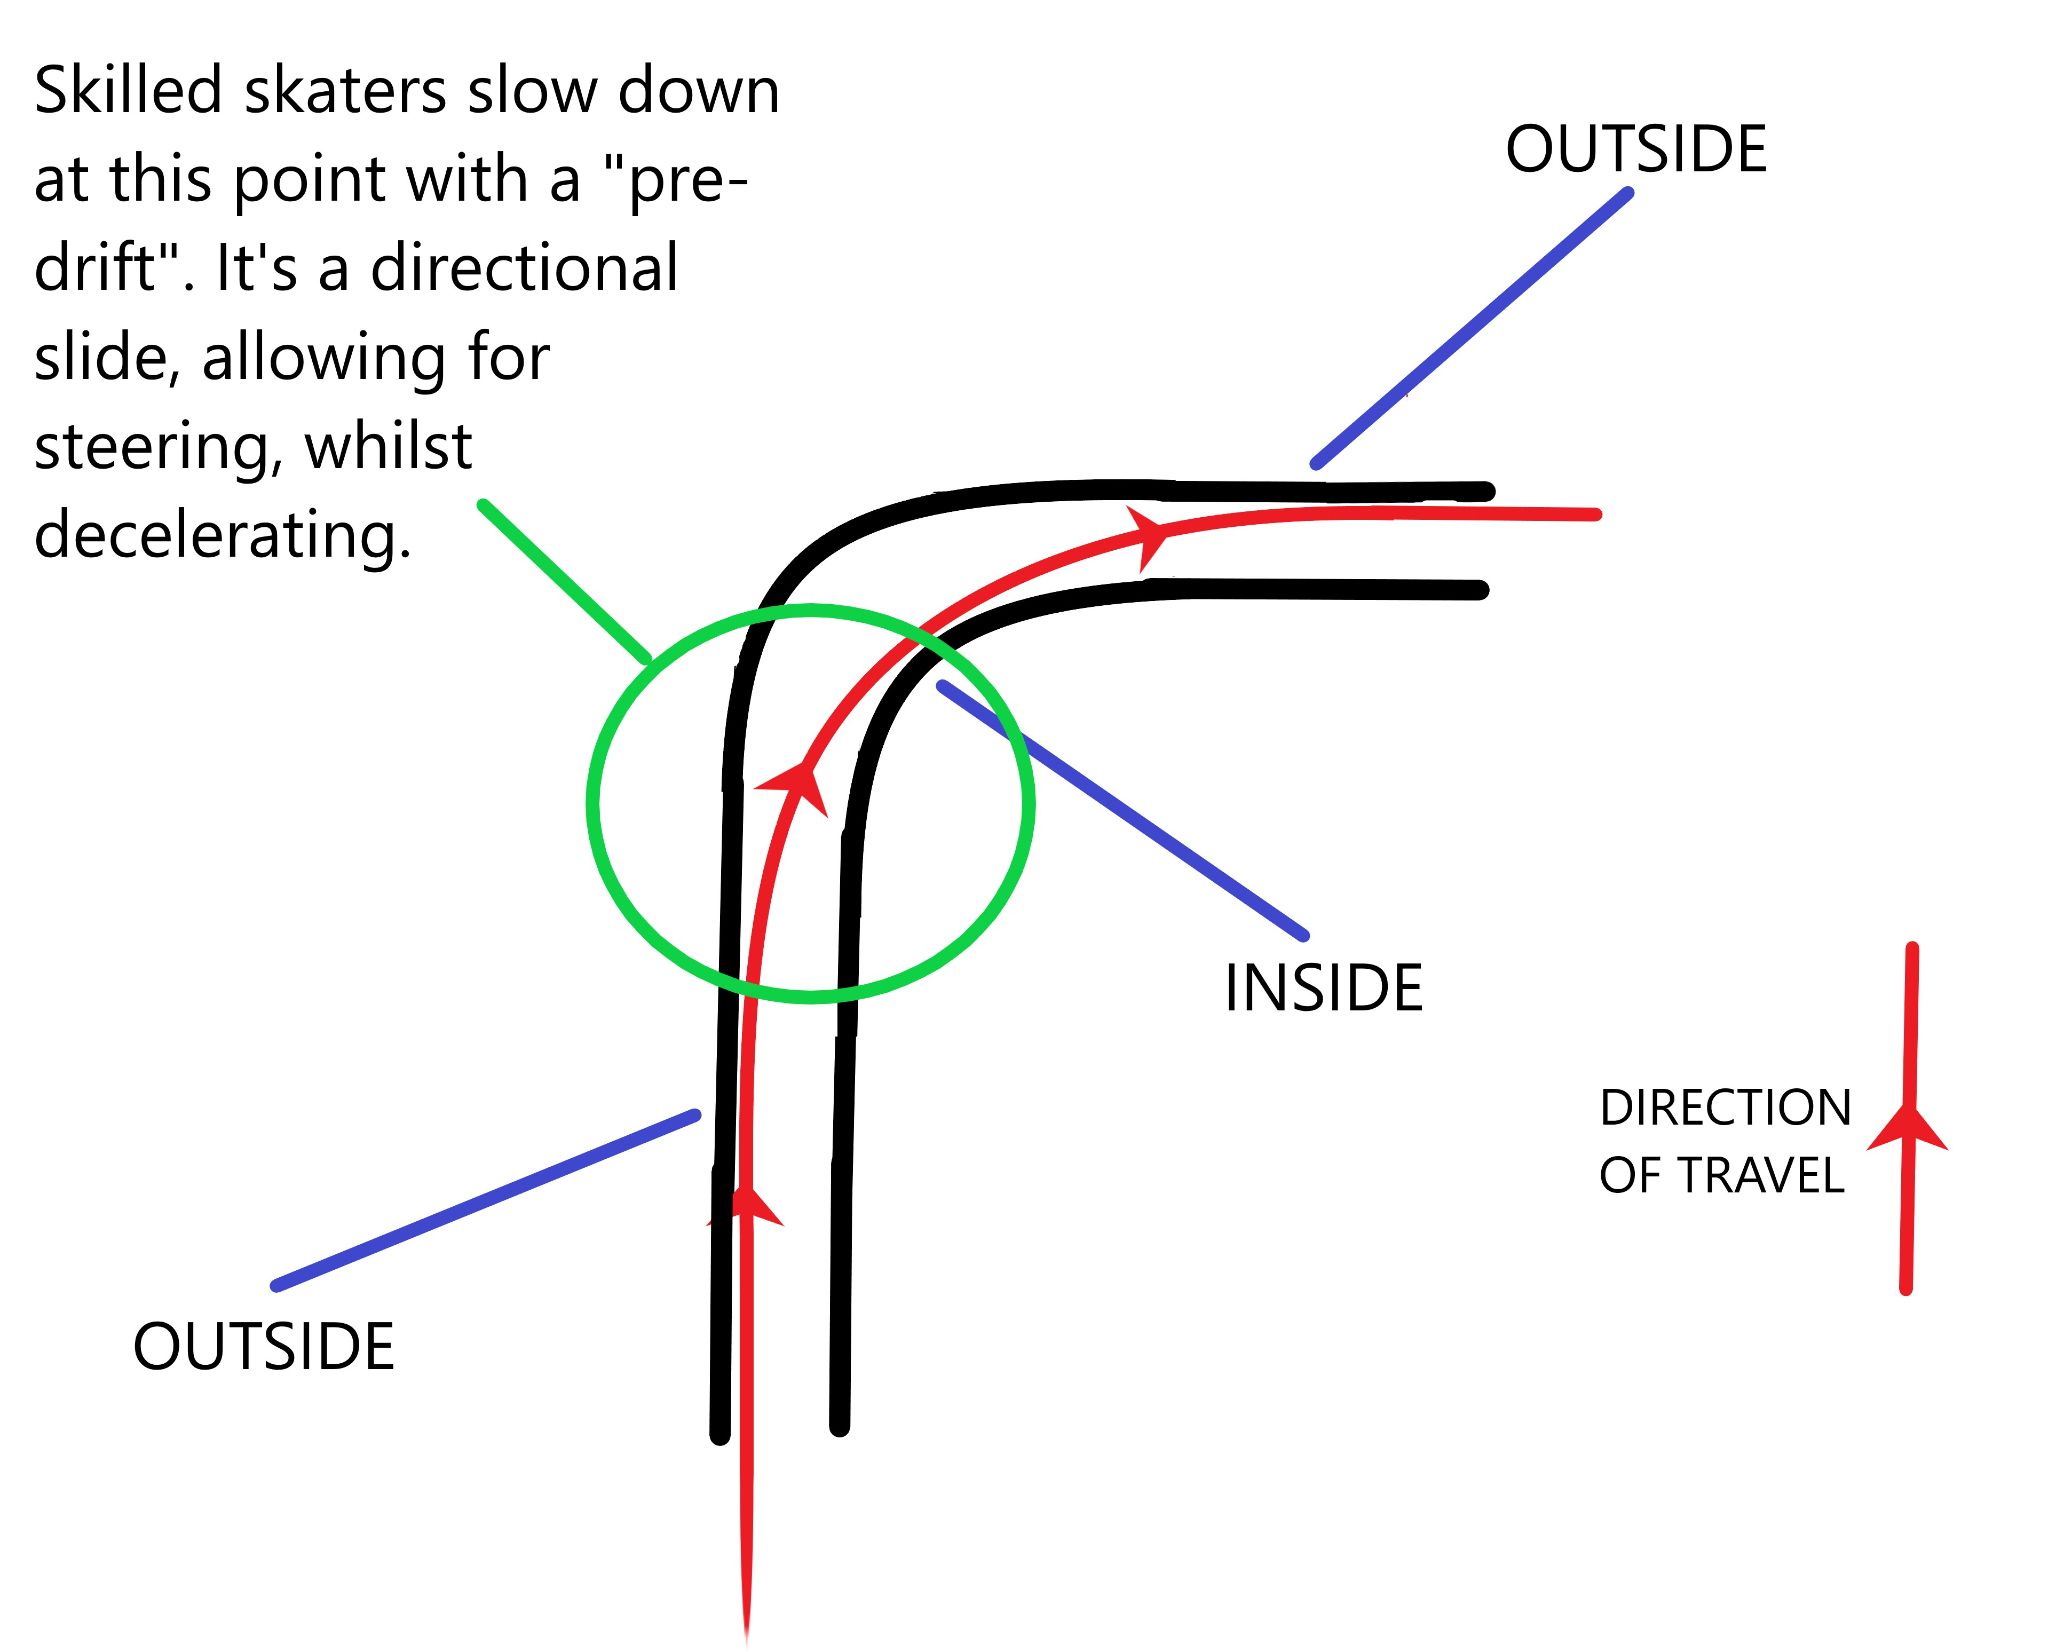 outside, inside, outside principle - how skilled skaters slow down with a pre-drift